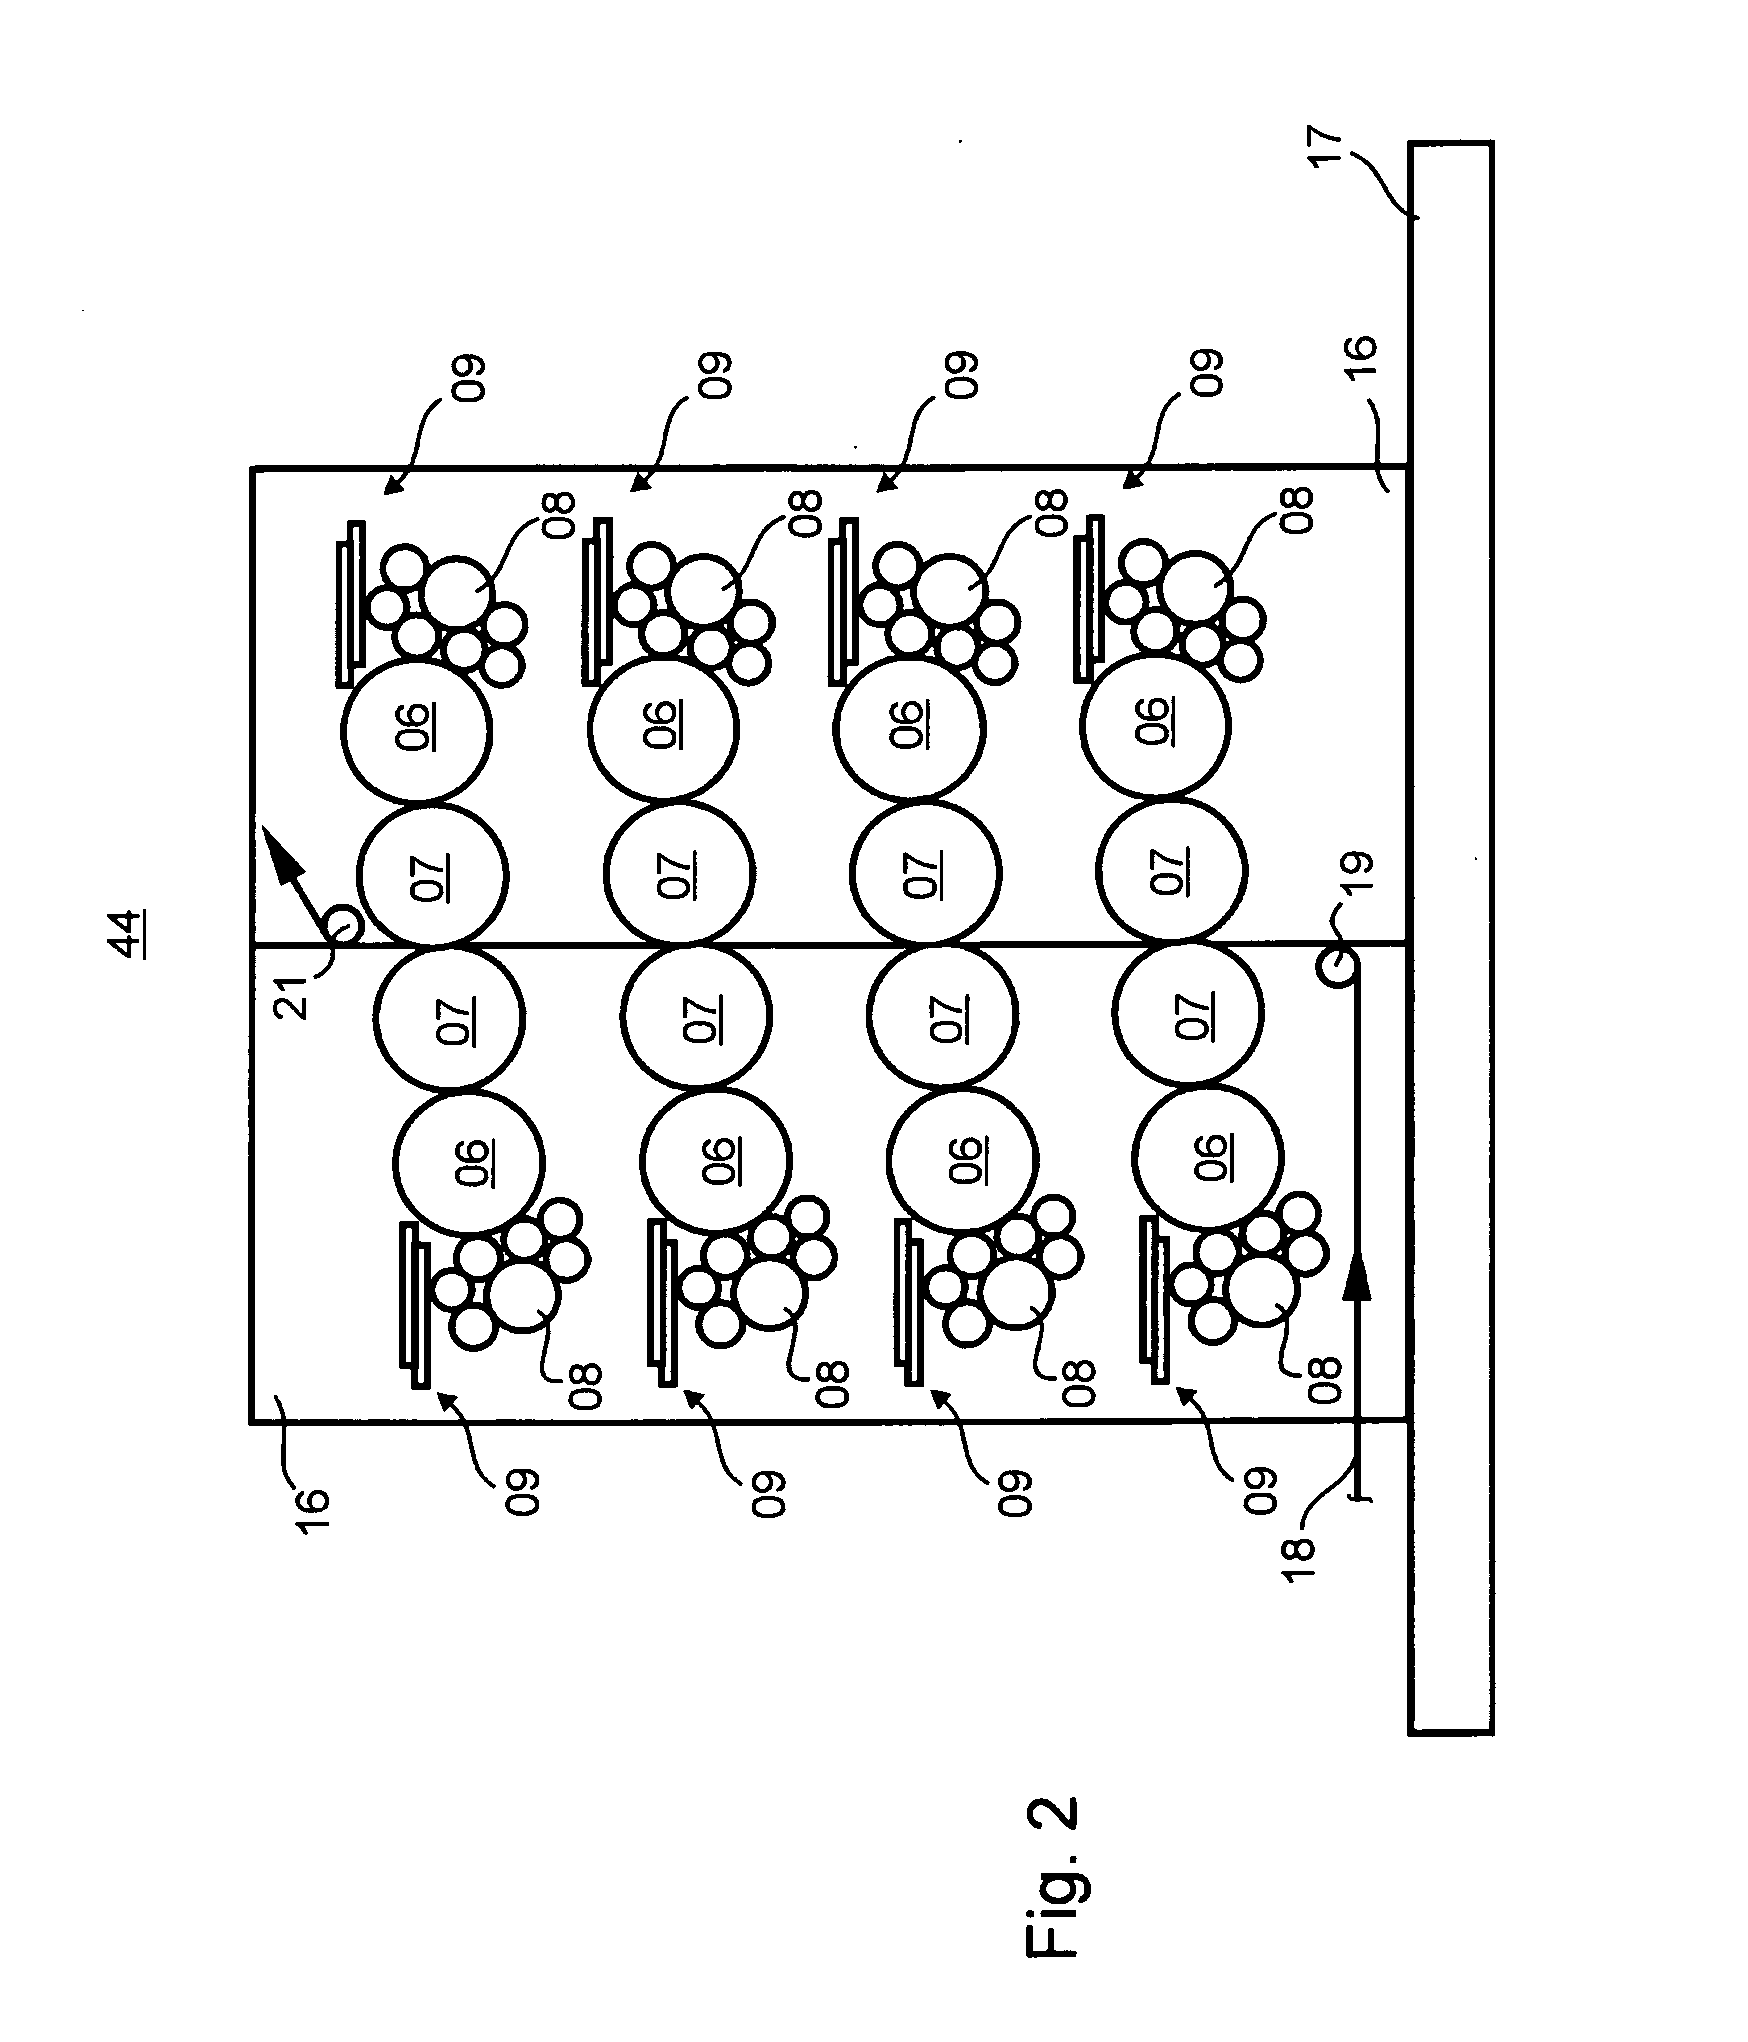 Method and apparatus for providing information about printing plates to be manufactured for a new production of a printing press